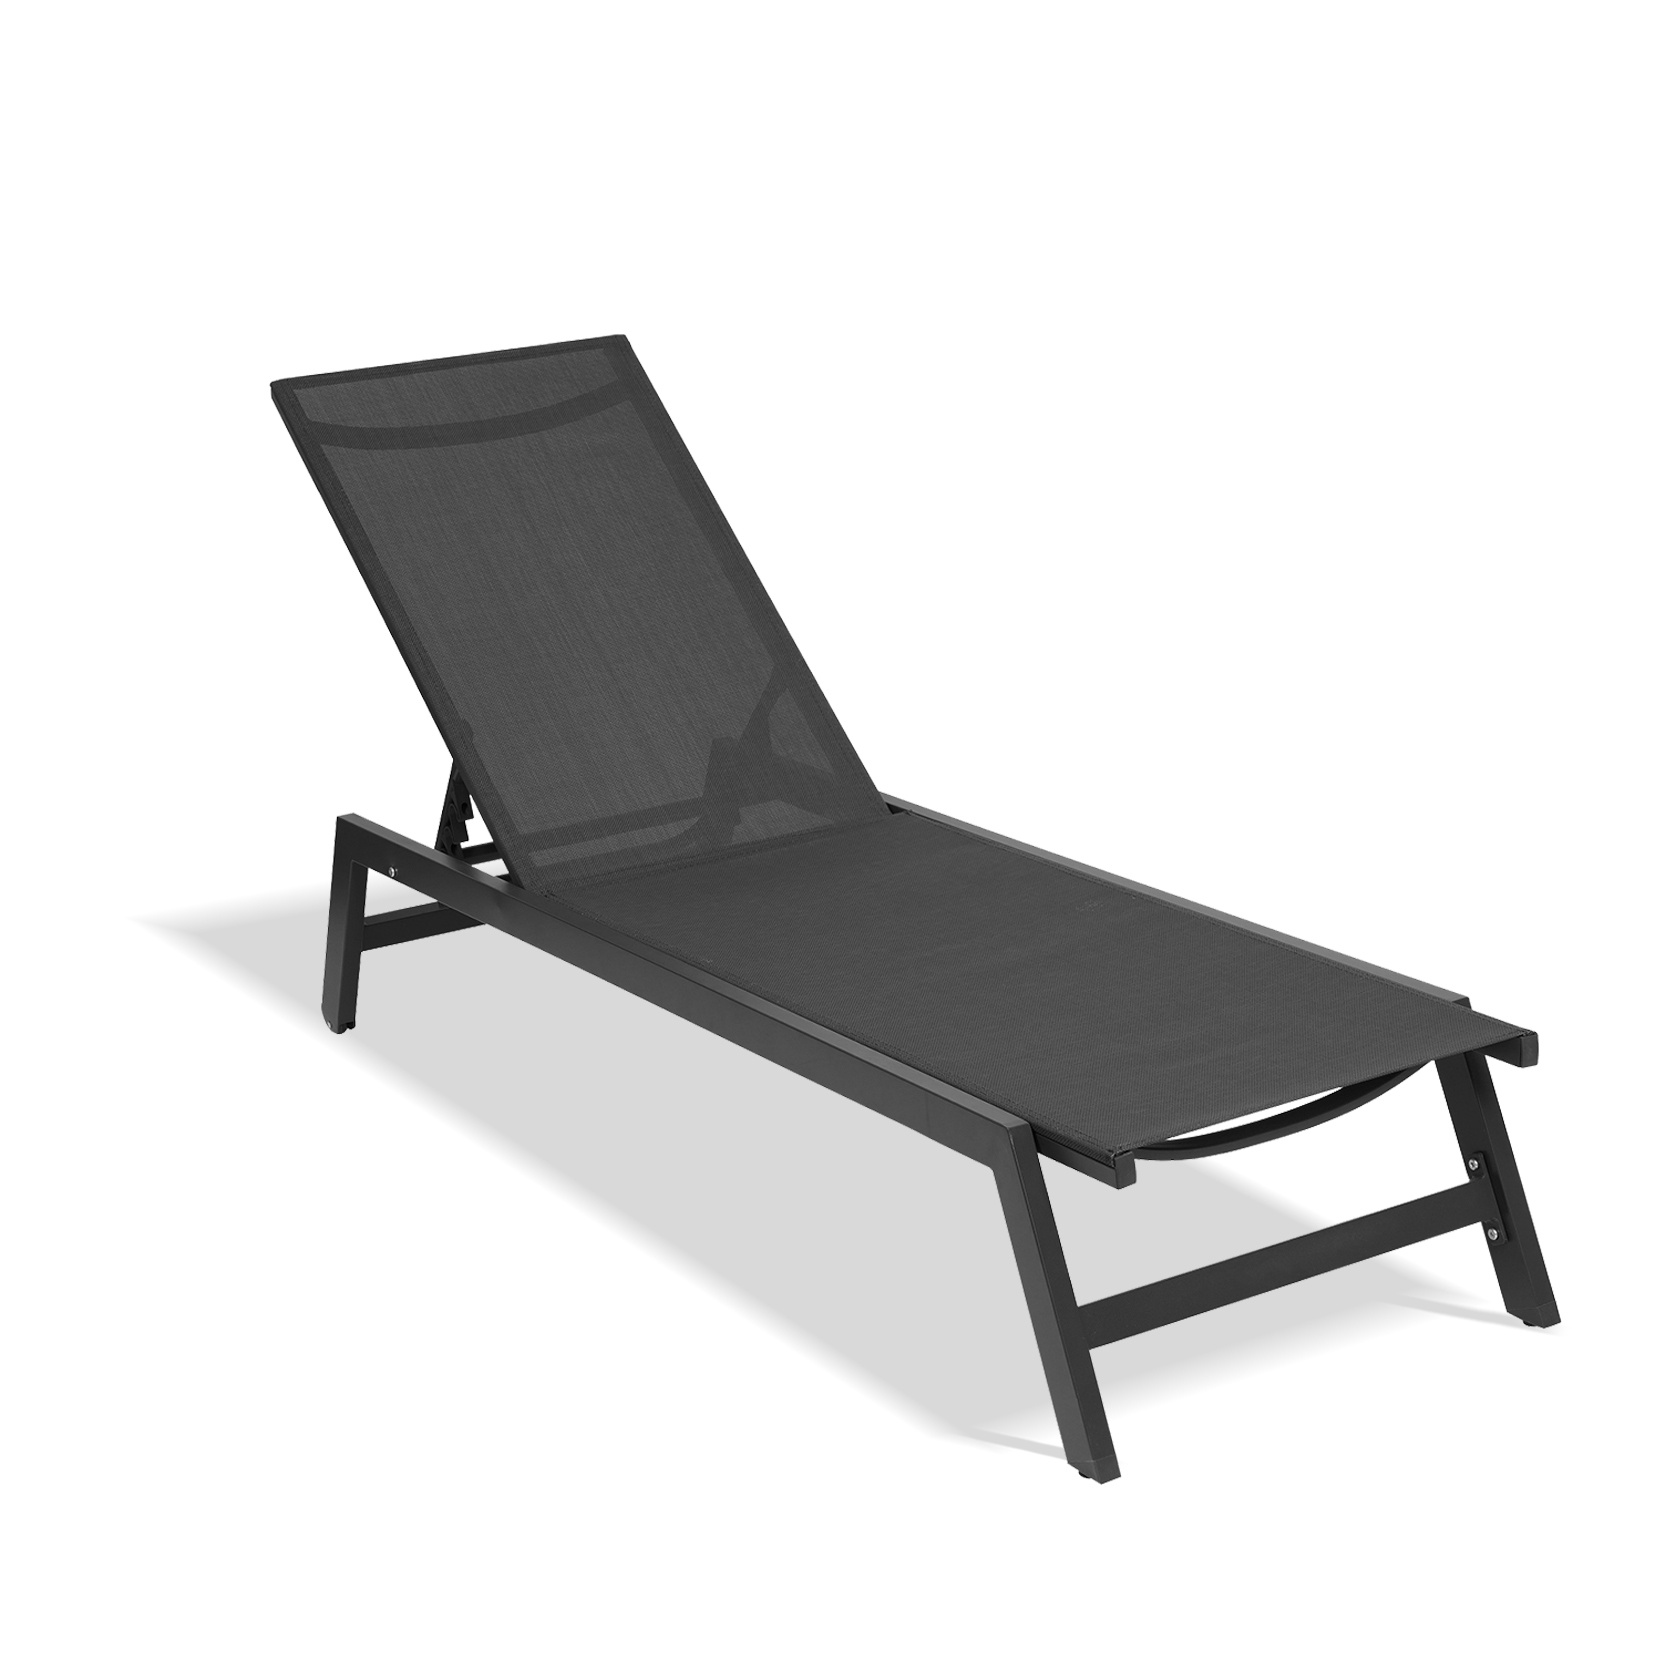 Outdoor Chaise Lounge Chair,Five-Position Adjustable Aluminum Recliner,All Weather For Patio,Beach,Yard, Pool(Grey Frame/Black Fabric)-Boyel Living